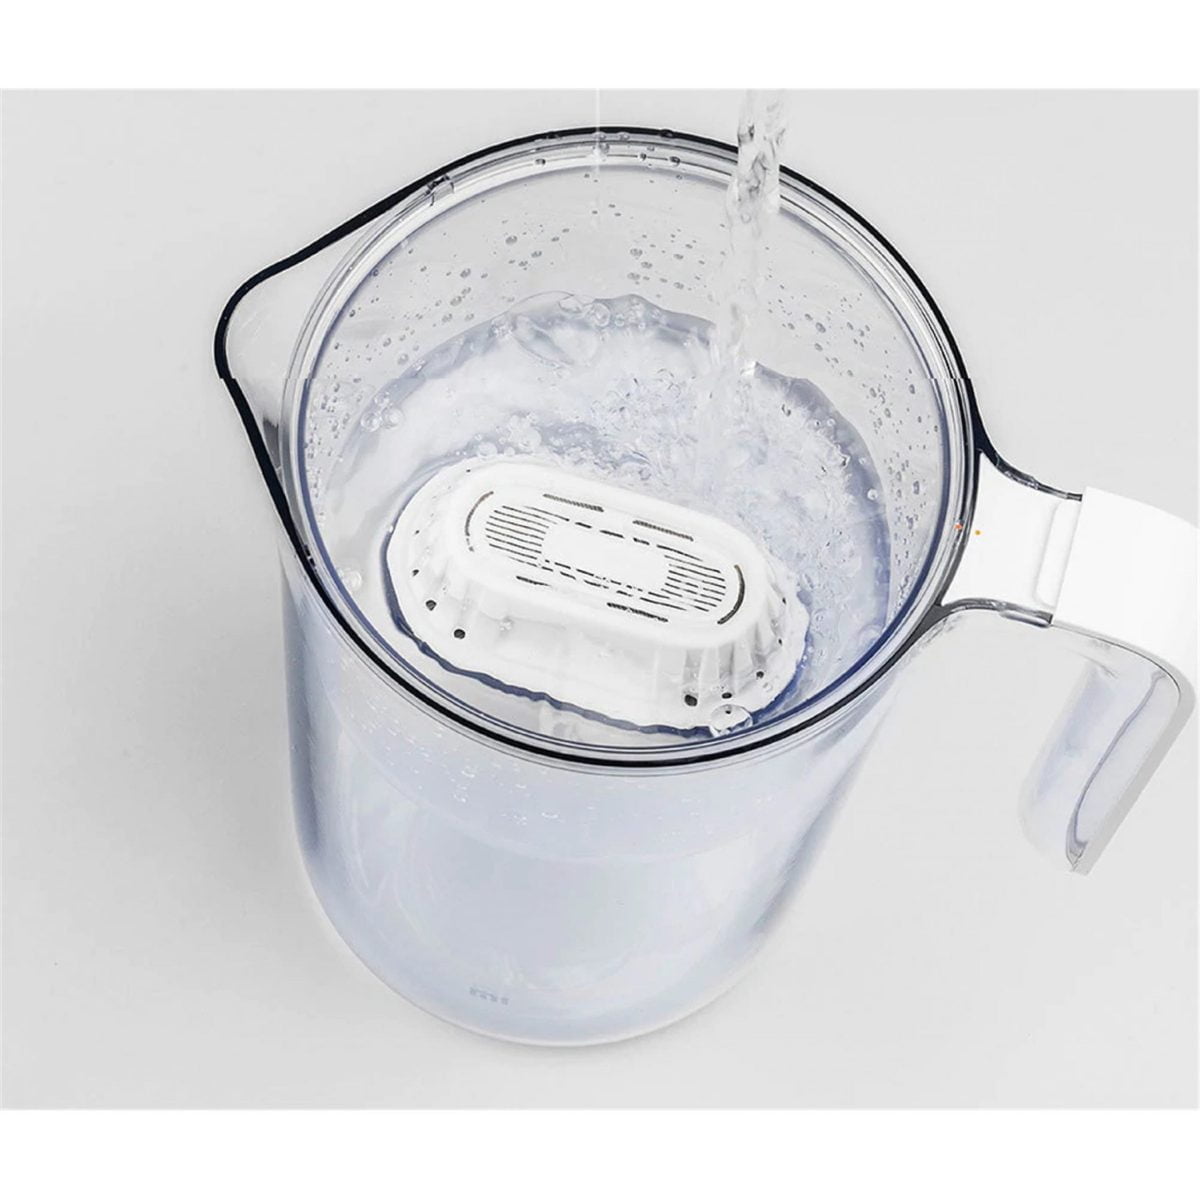 Water 01 Scaled Xiaomi Xiaomi Mi Home Water Filter Pitcher Easy To Remove The Lid, Funnel Open Design, Dust-Proof Spout &Nbsp; Xiaomi Mi Home Water Filter Pitcher